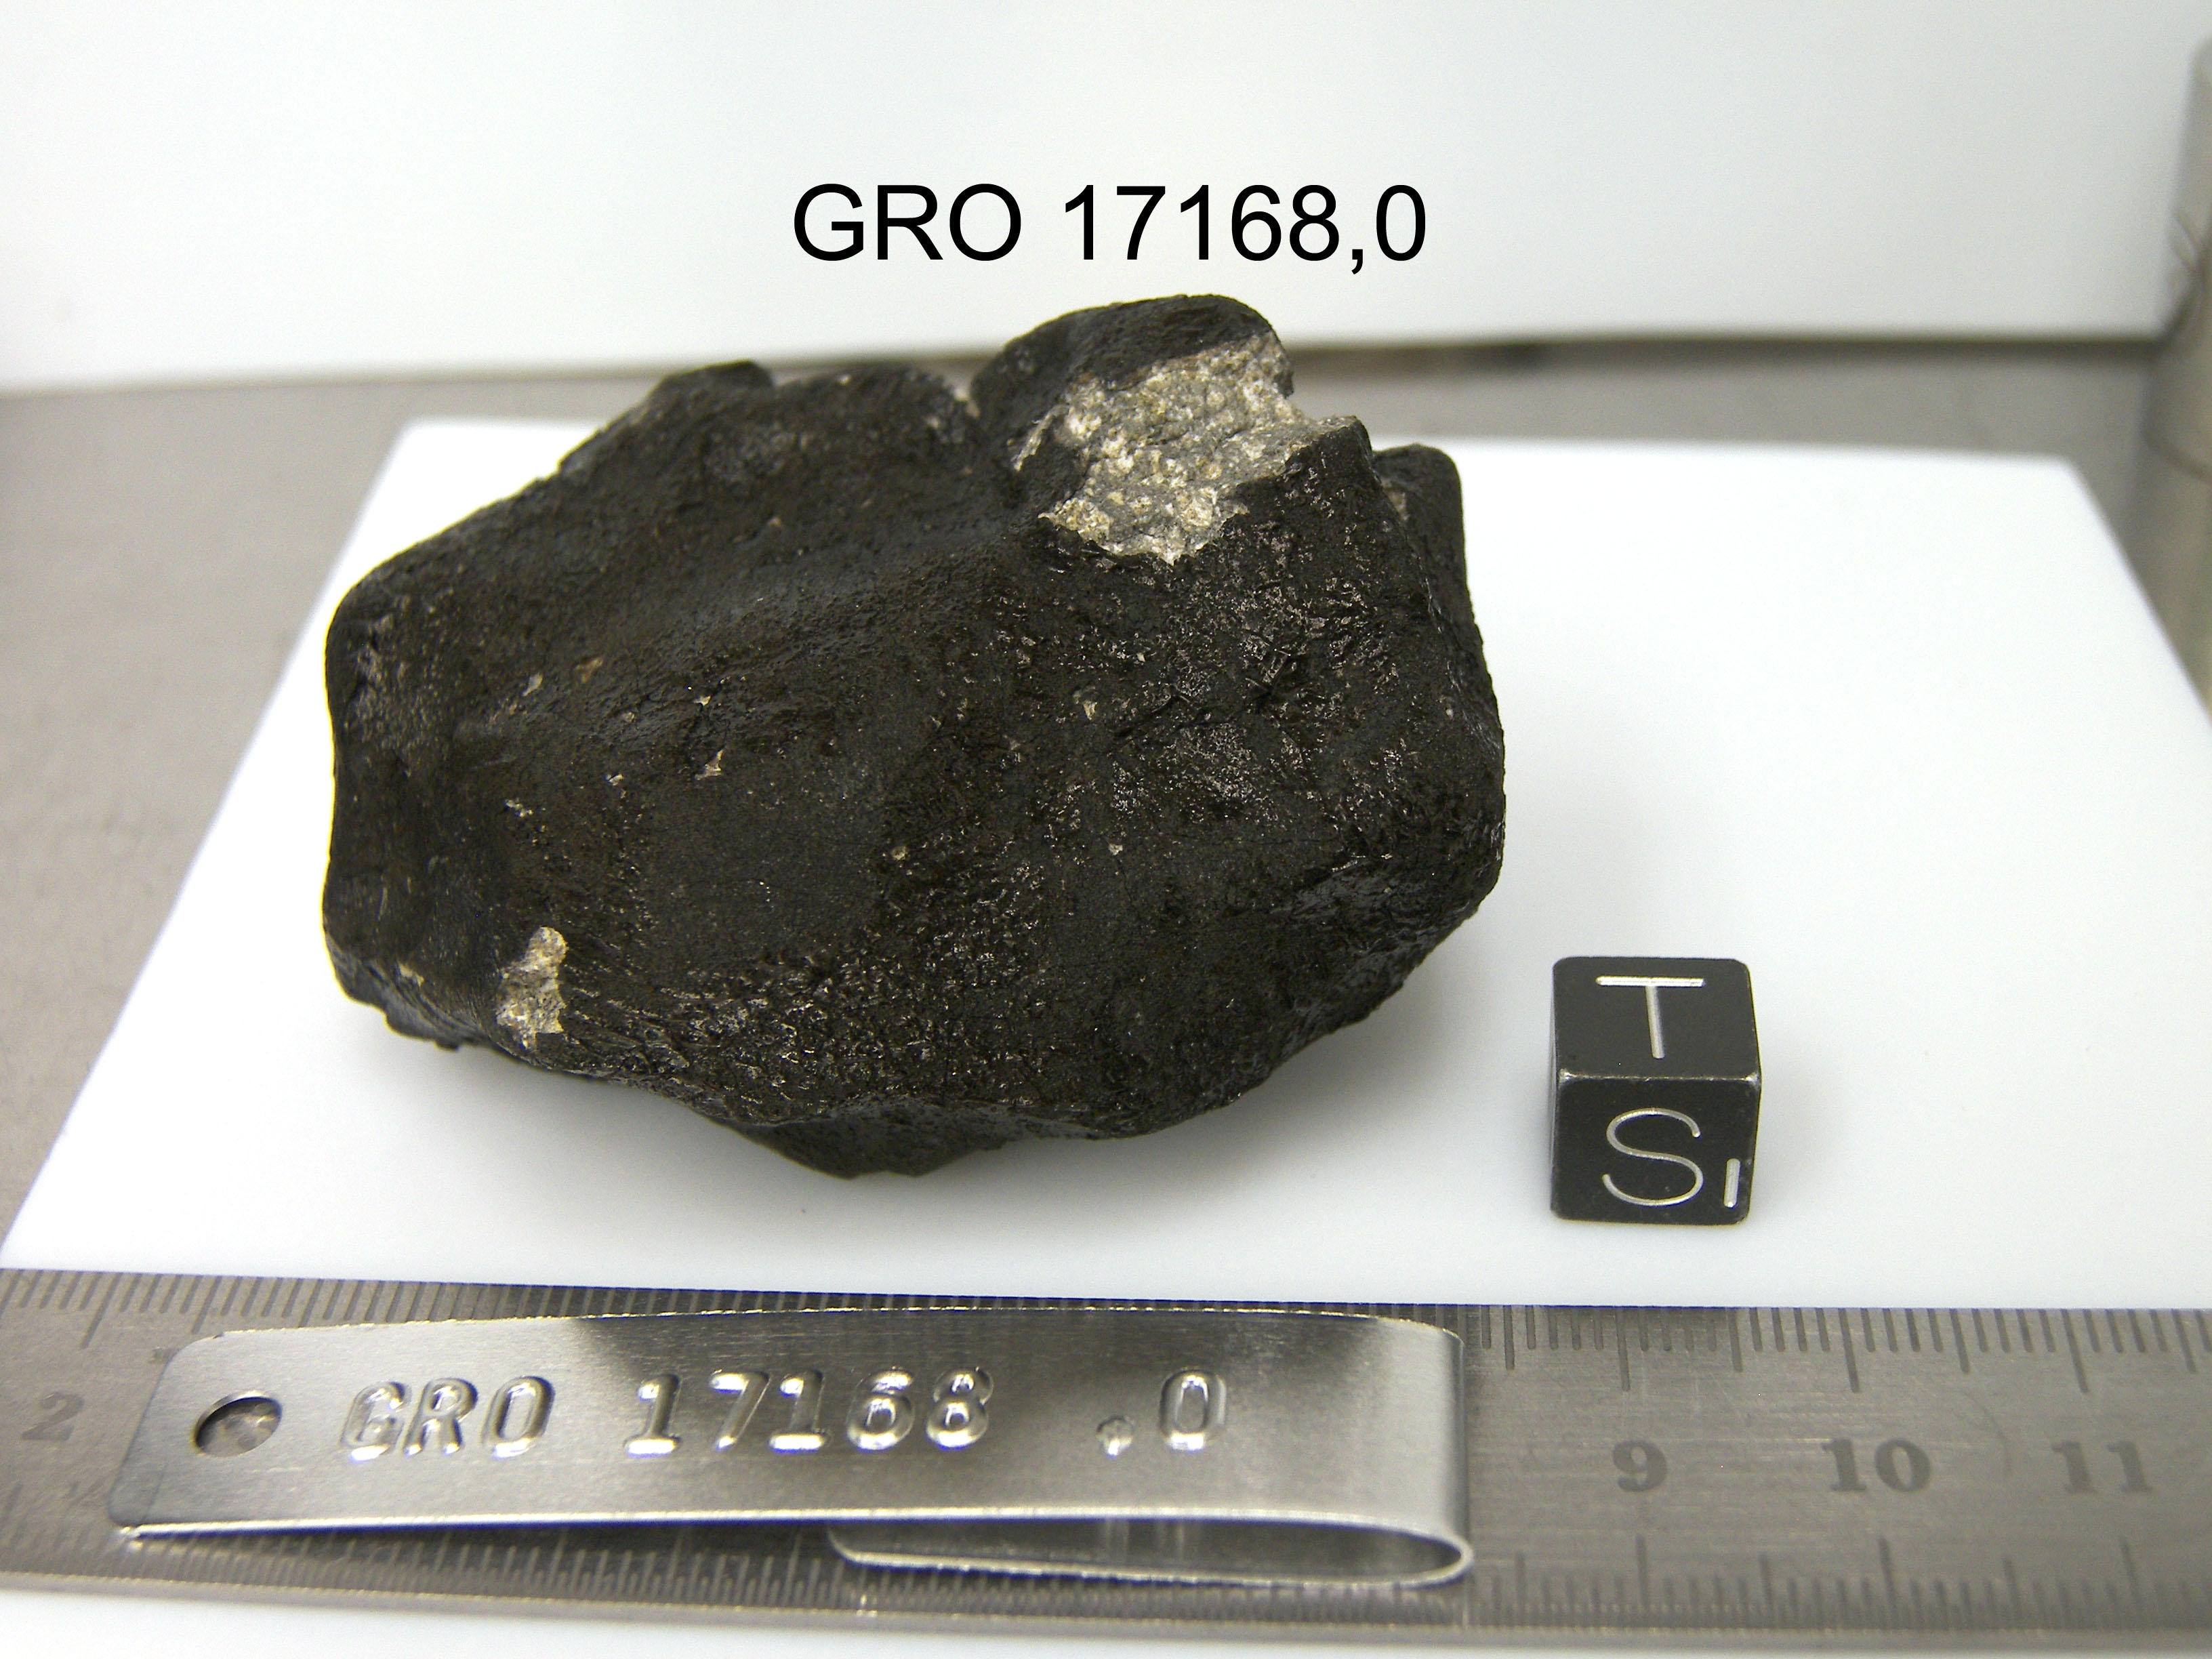 Lab Photo of Sample GRO 17168 Displaying South Orientation